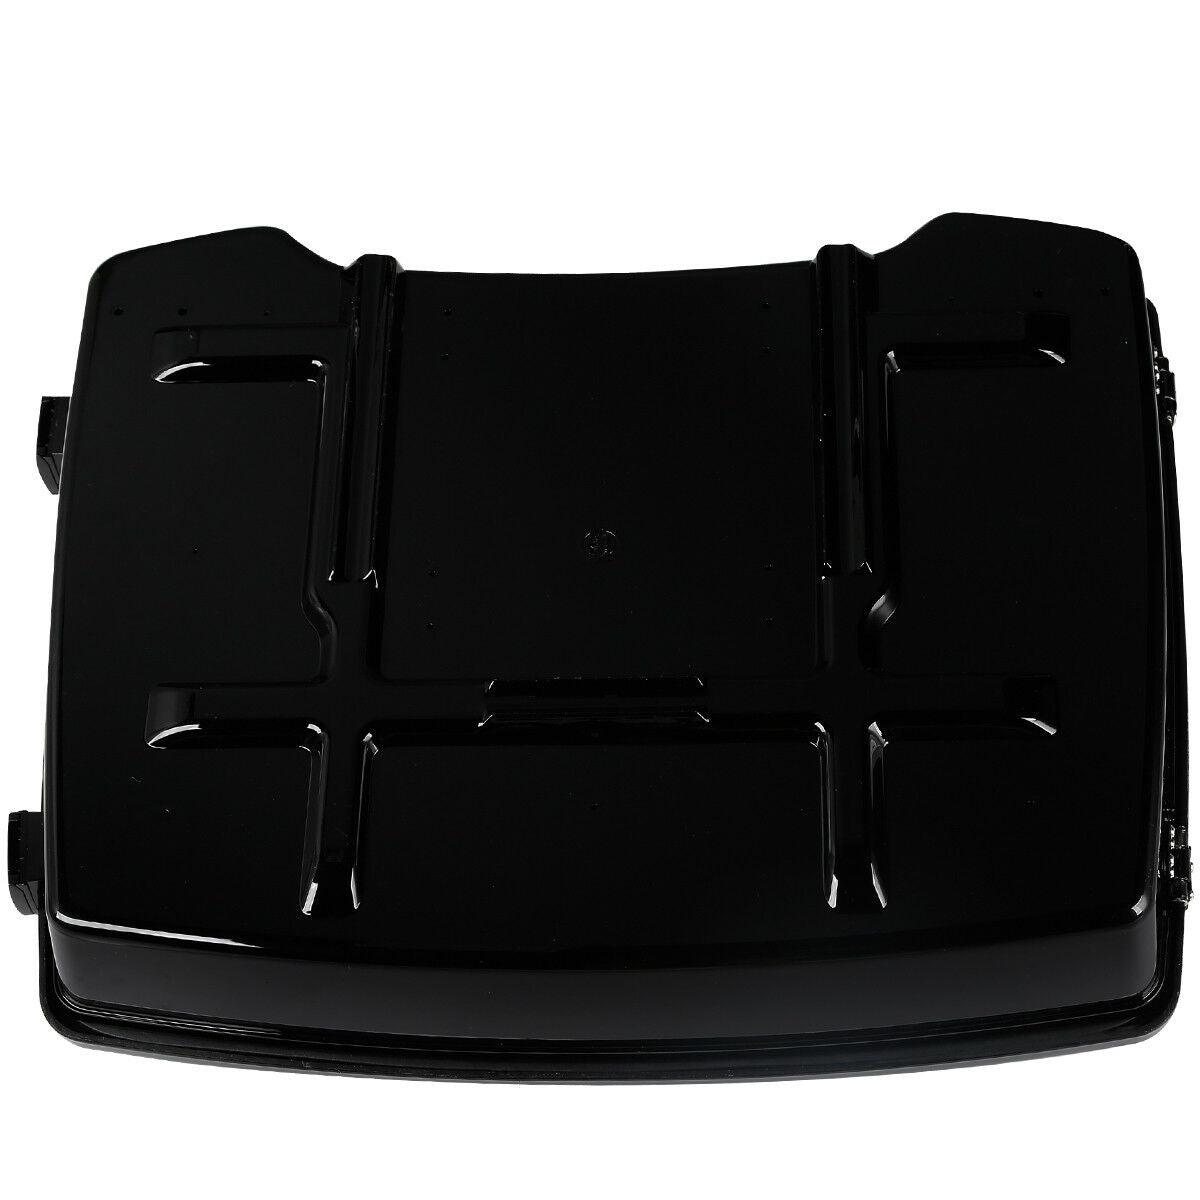 Razor Pack Trunk Black Latch Fit For Harley Tour Pak Electra Road Glide 97-13 US - Moto Life Products